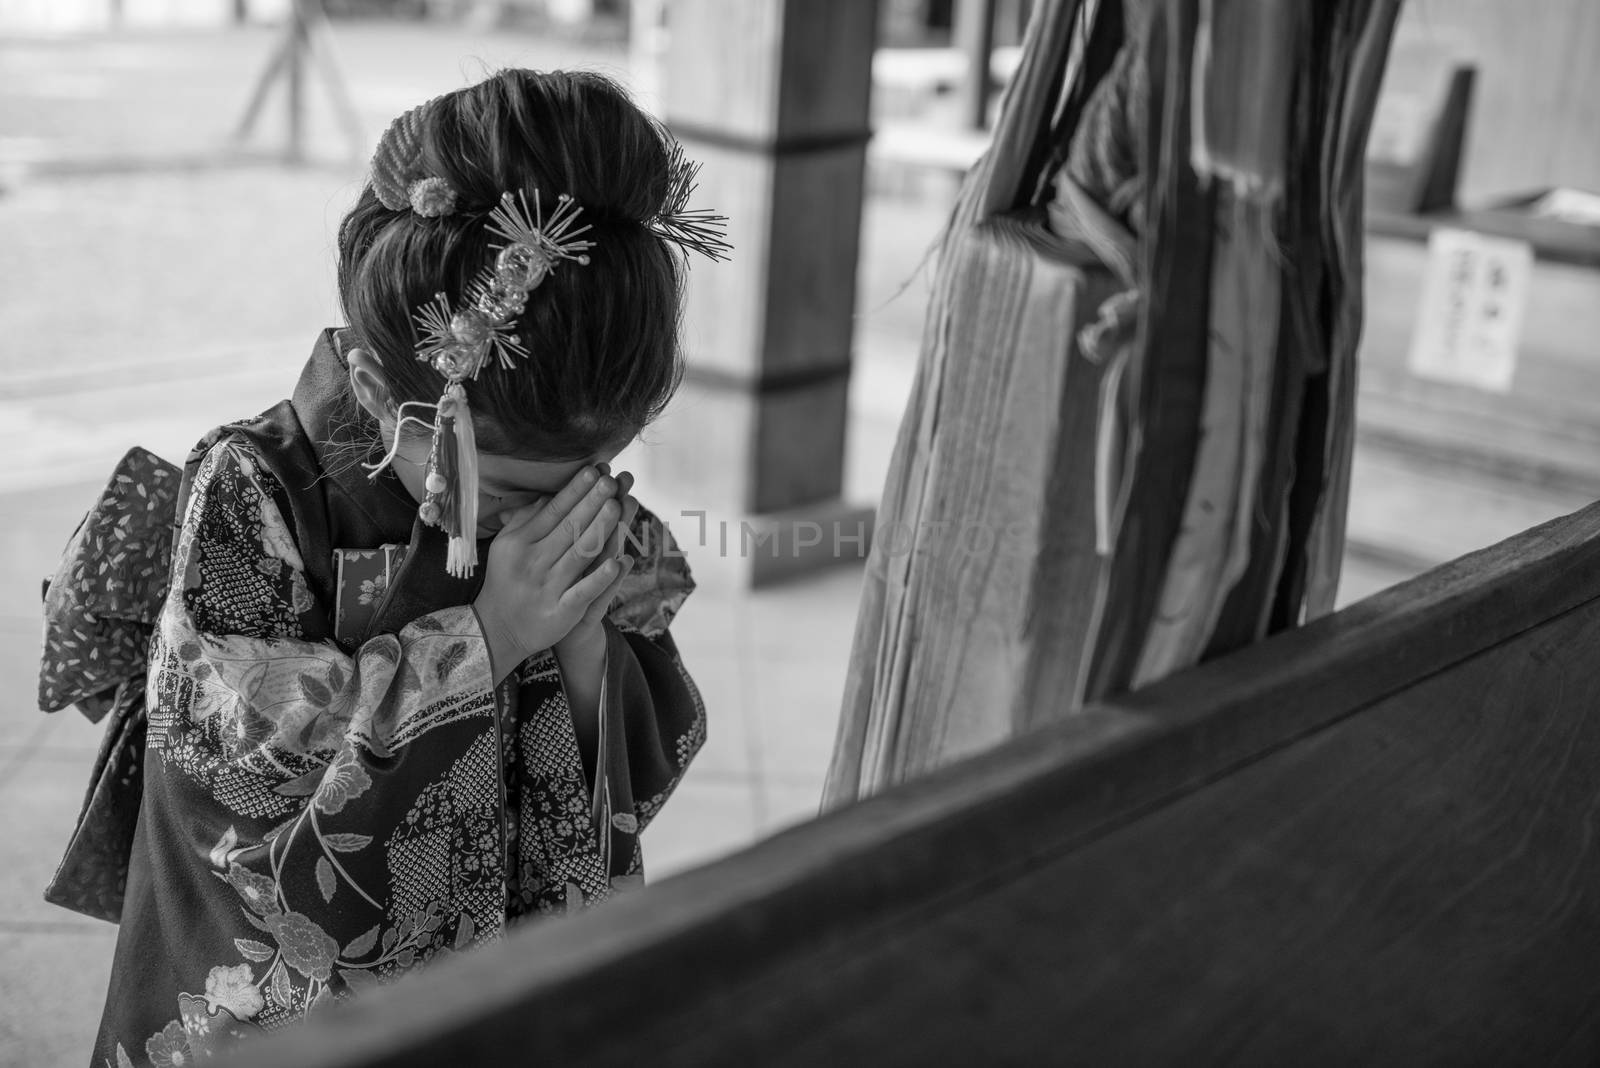 Young Girl in Kimono by justtscott